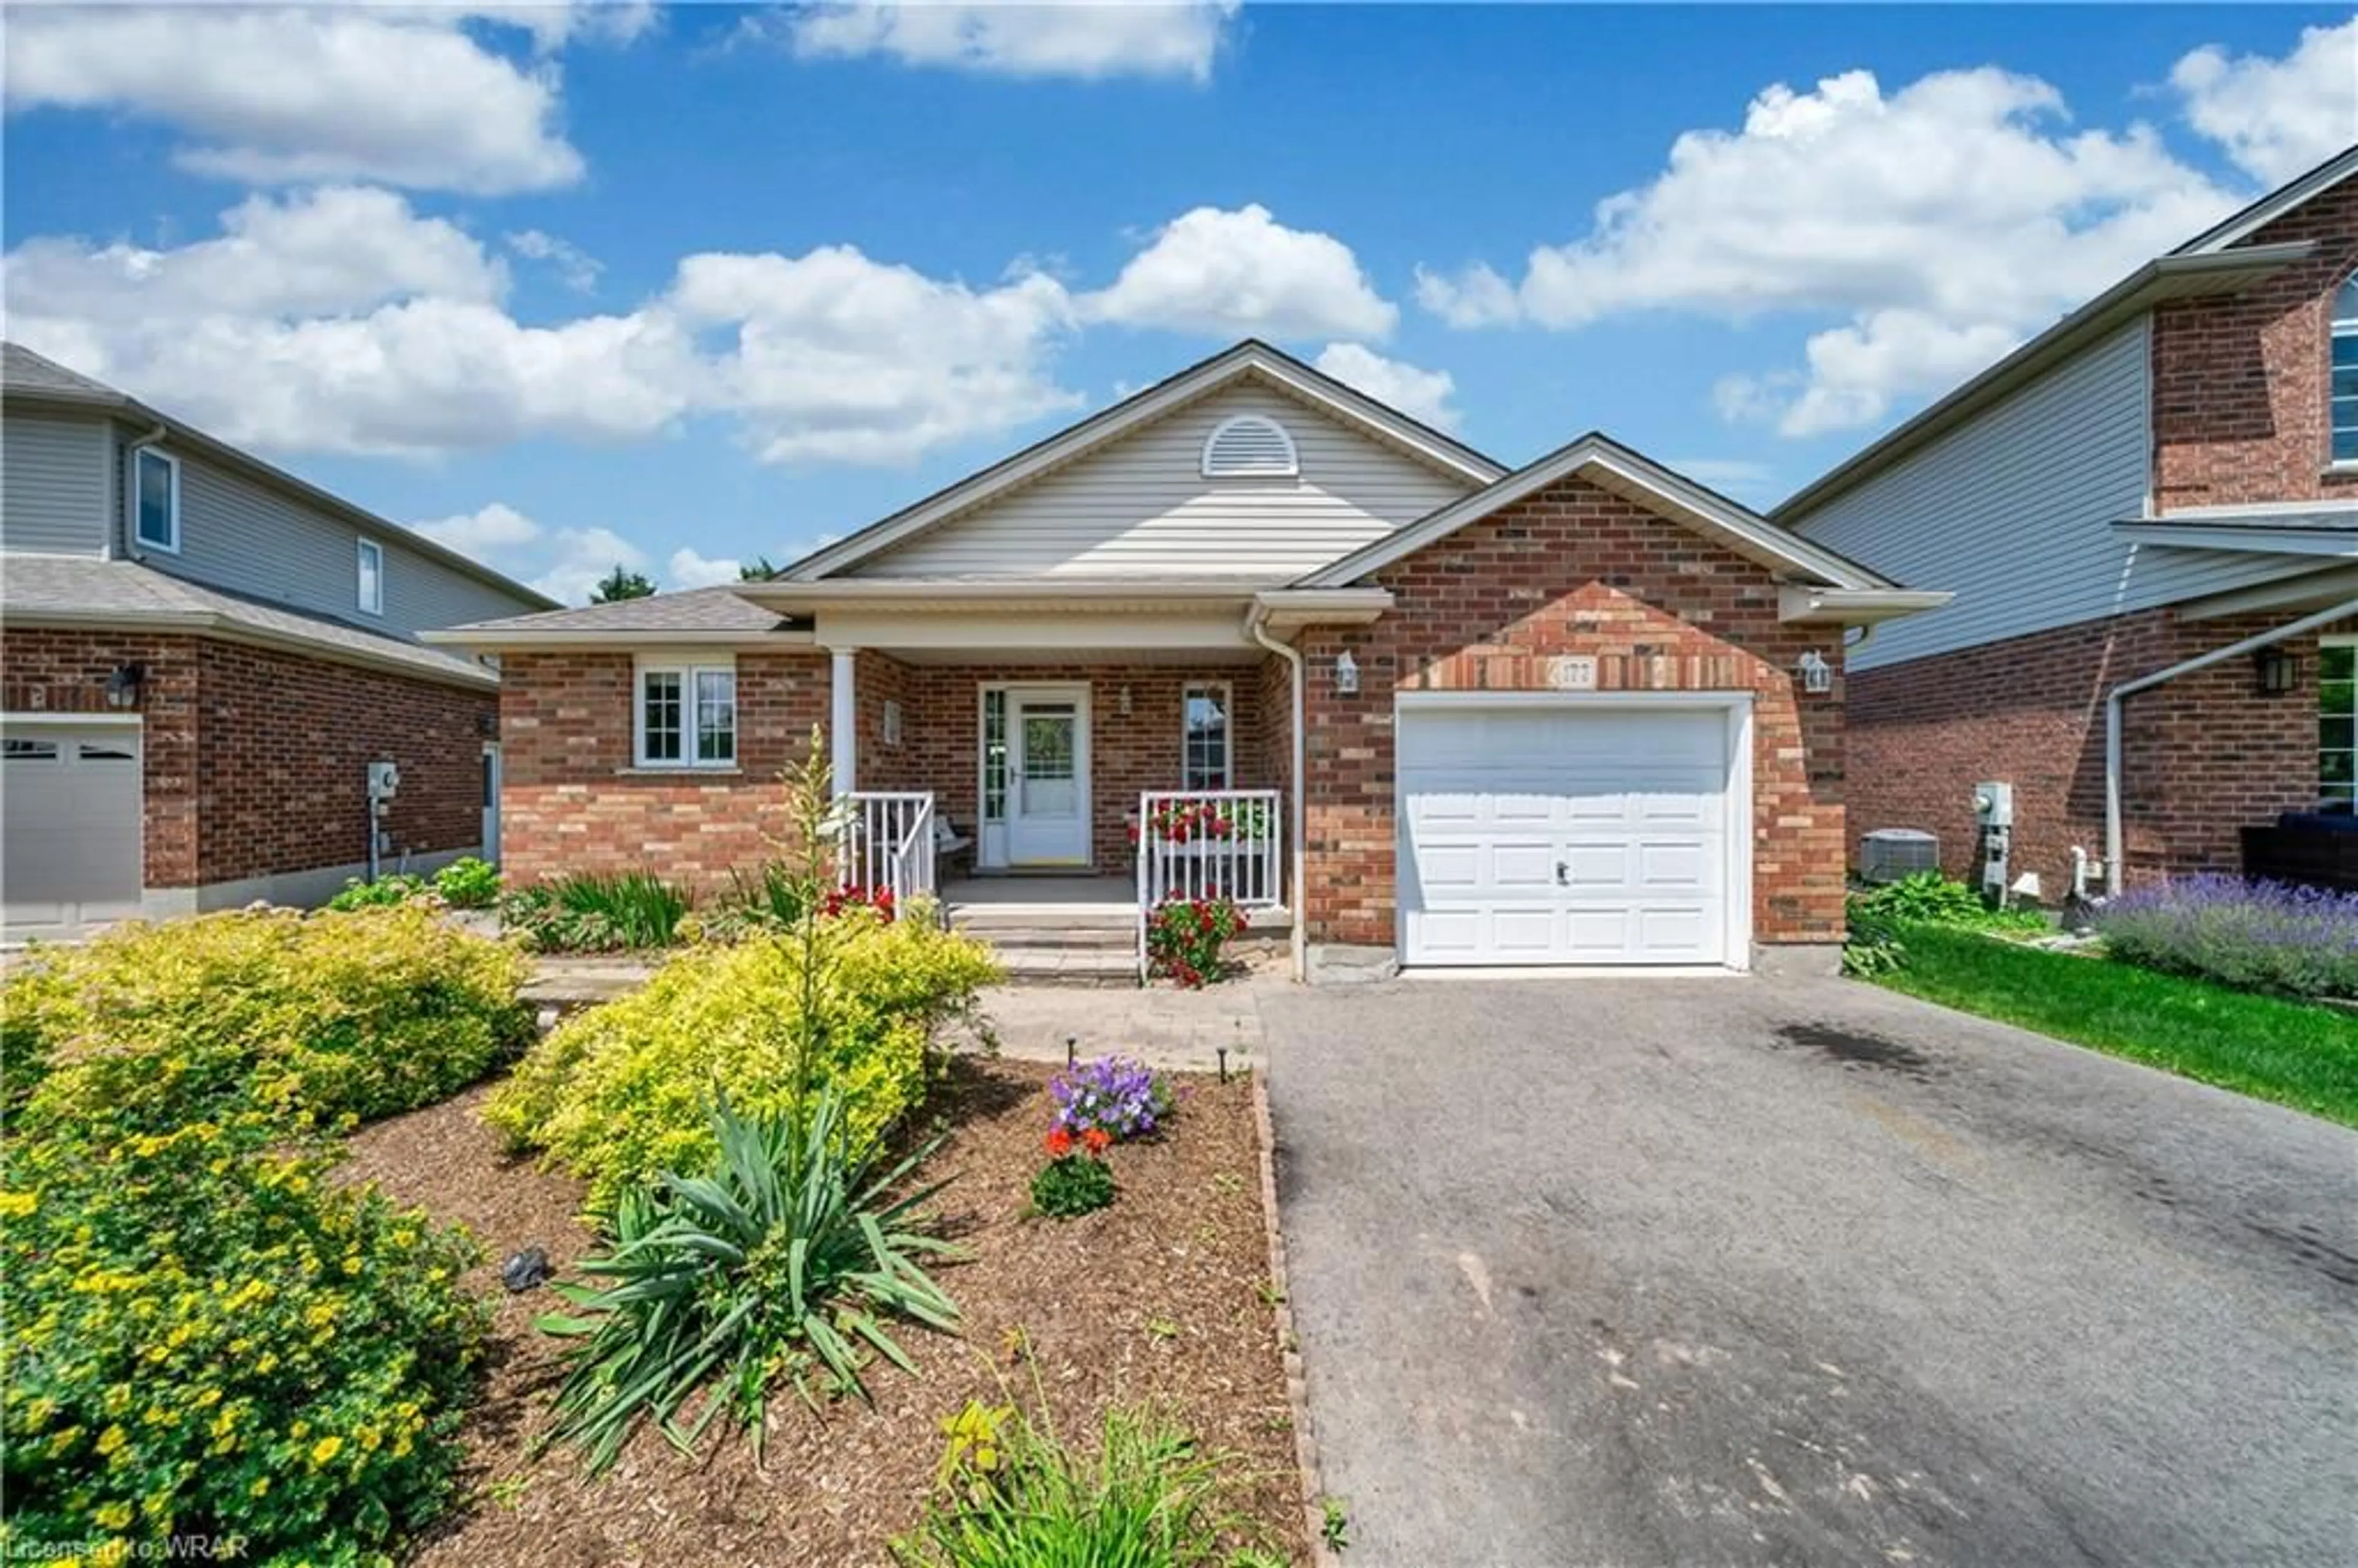 Home with brick exterior material for 177 Stiefelmeyer Cres, Baden Ontario N3A 4L5